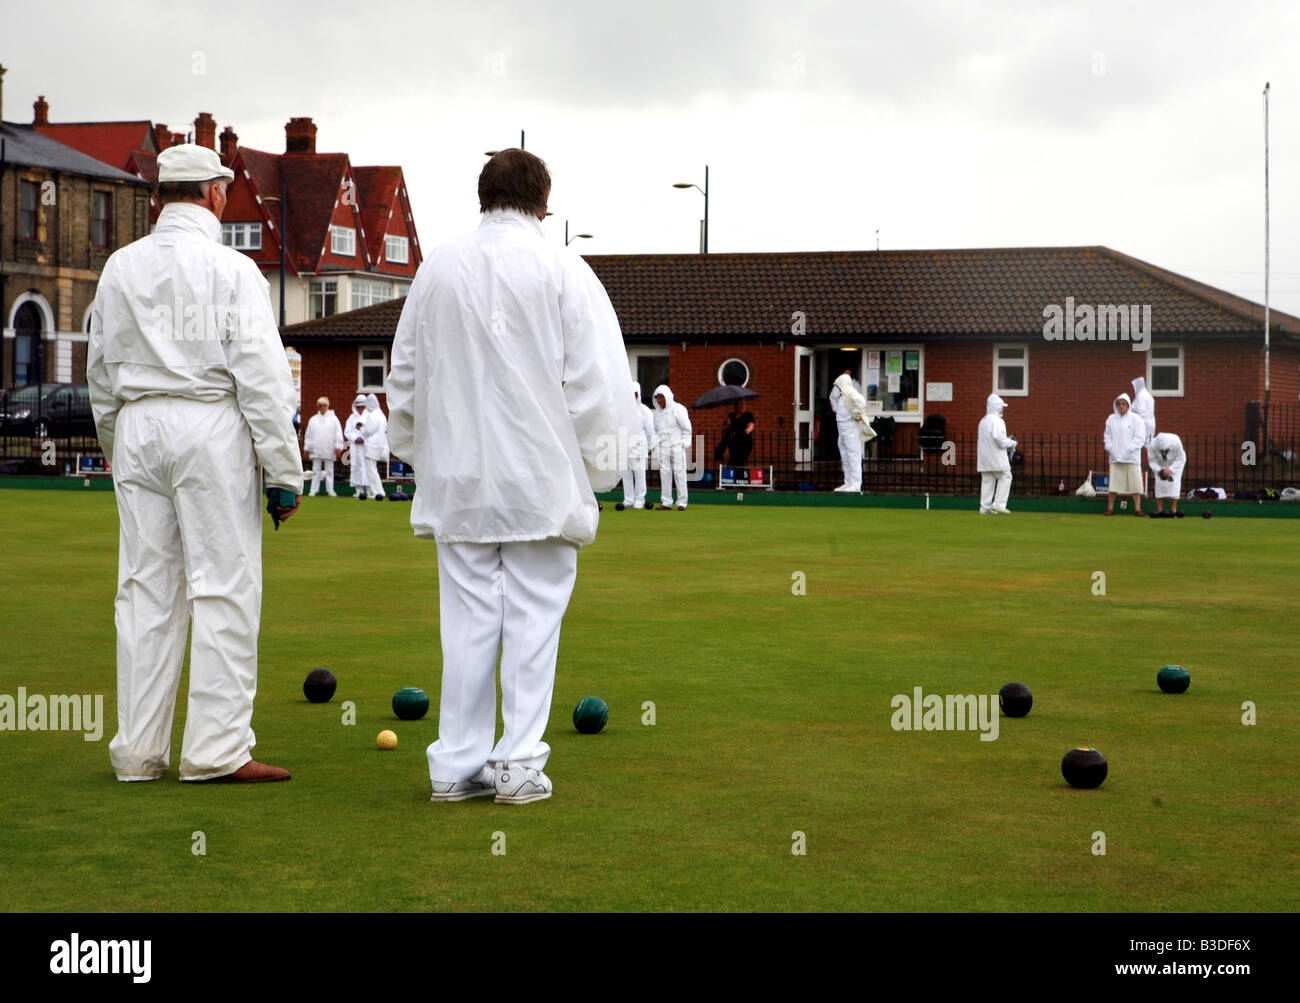 Bowlers in Great Yarmouth Norfolk defy heavy rain during a tournament in July 2008 Stock Photo